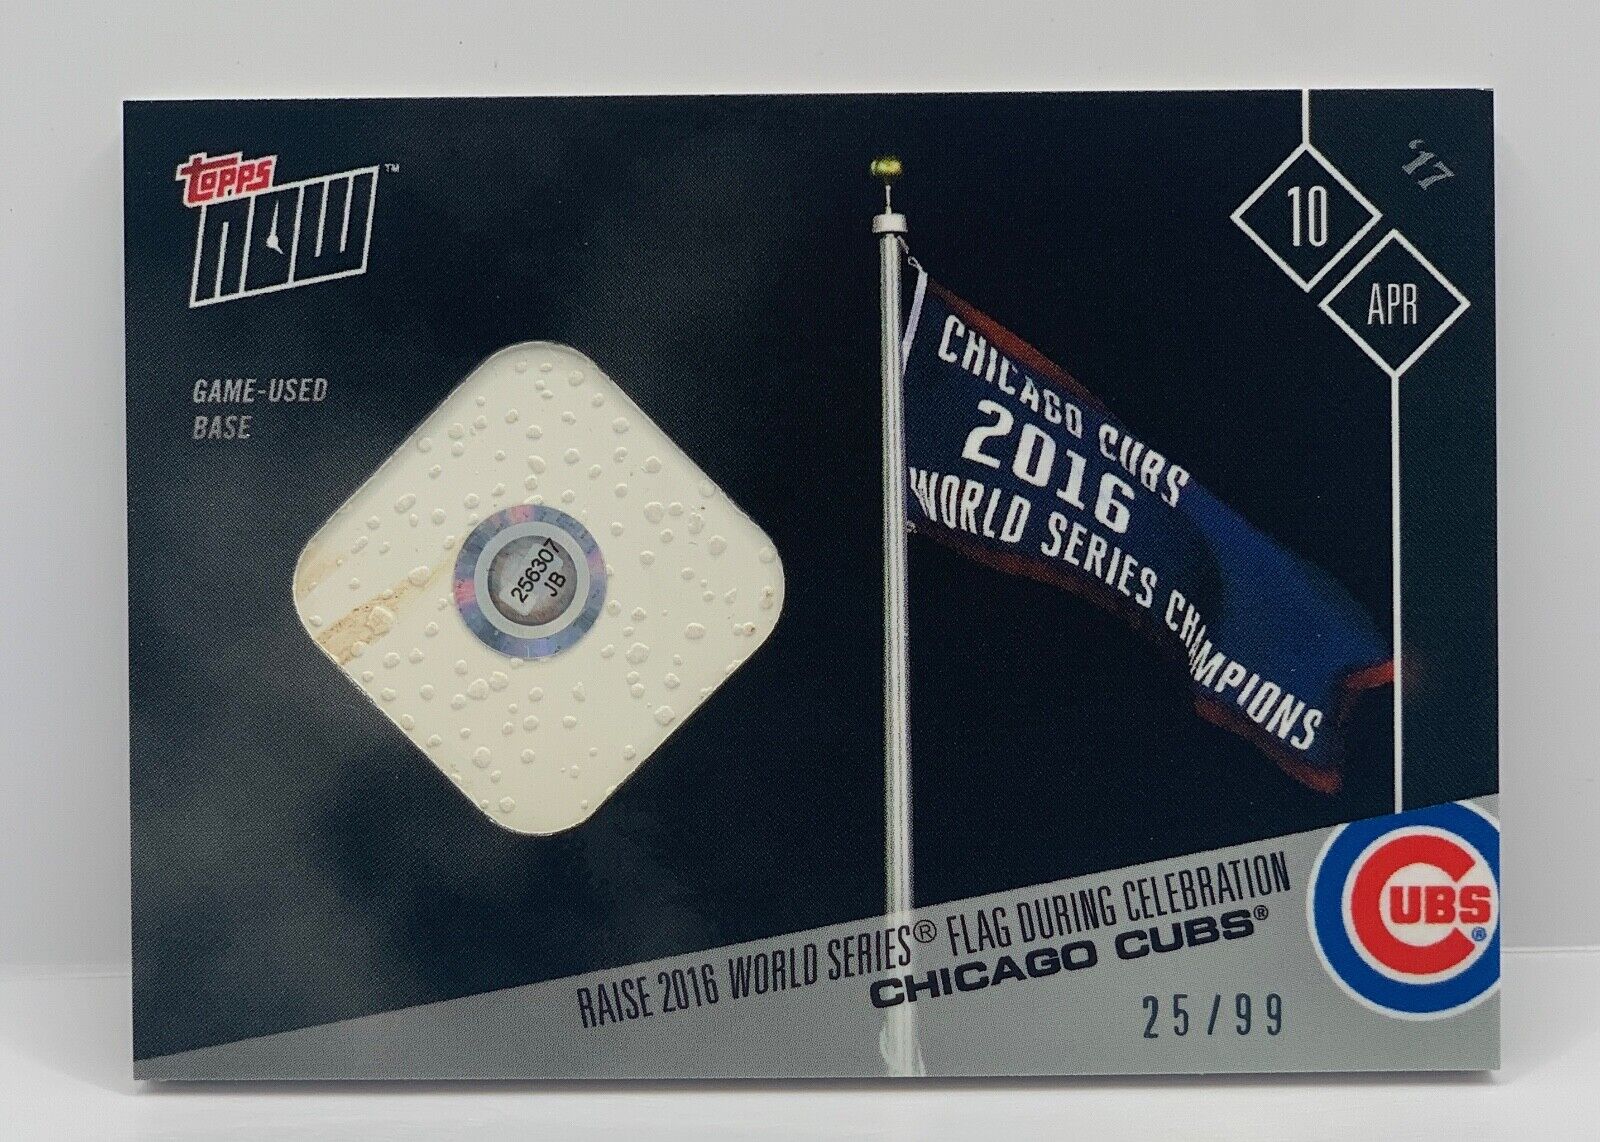 CHICAGO CUBS Game Used Base 2017 Topps Now #2A 25/99 Raise 2016 WSC MLB Hologram